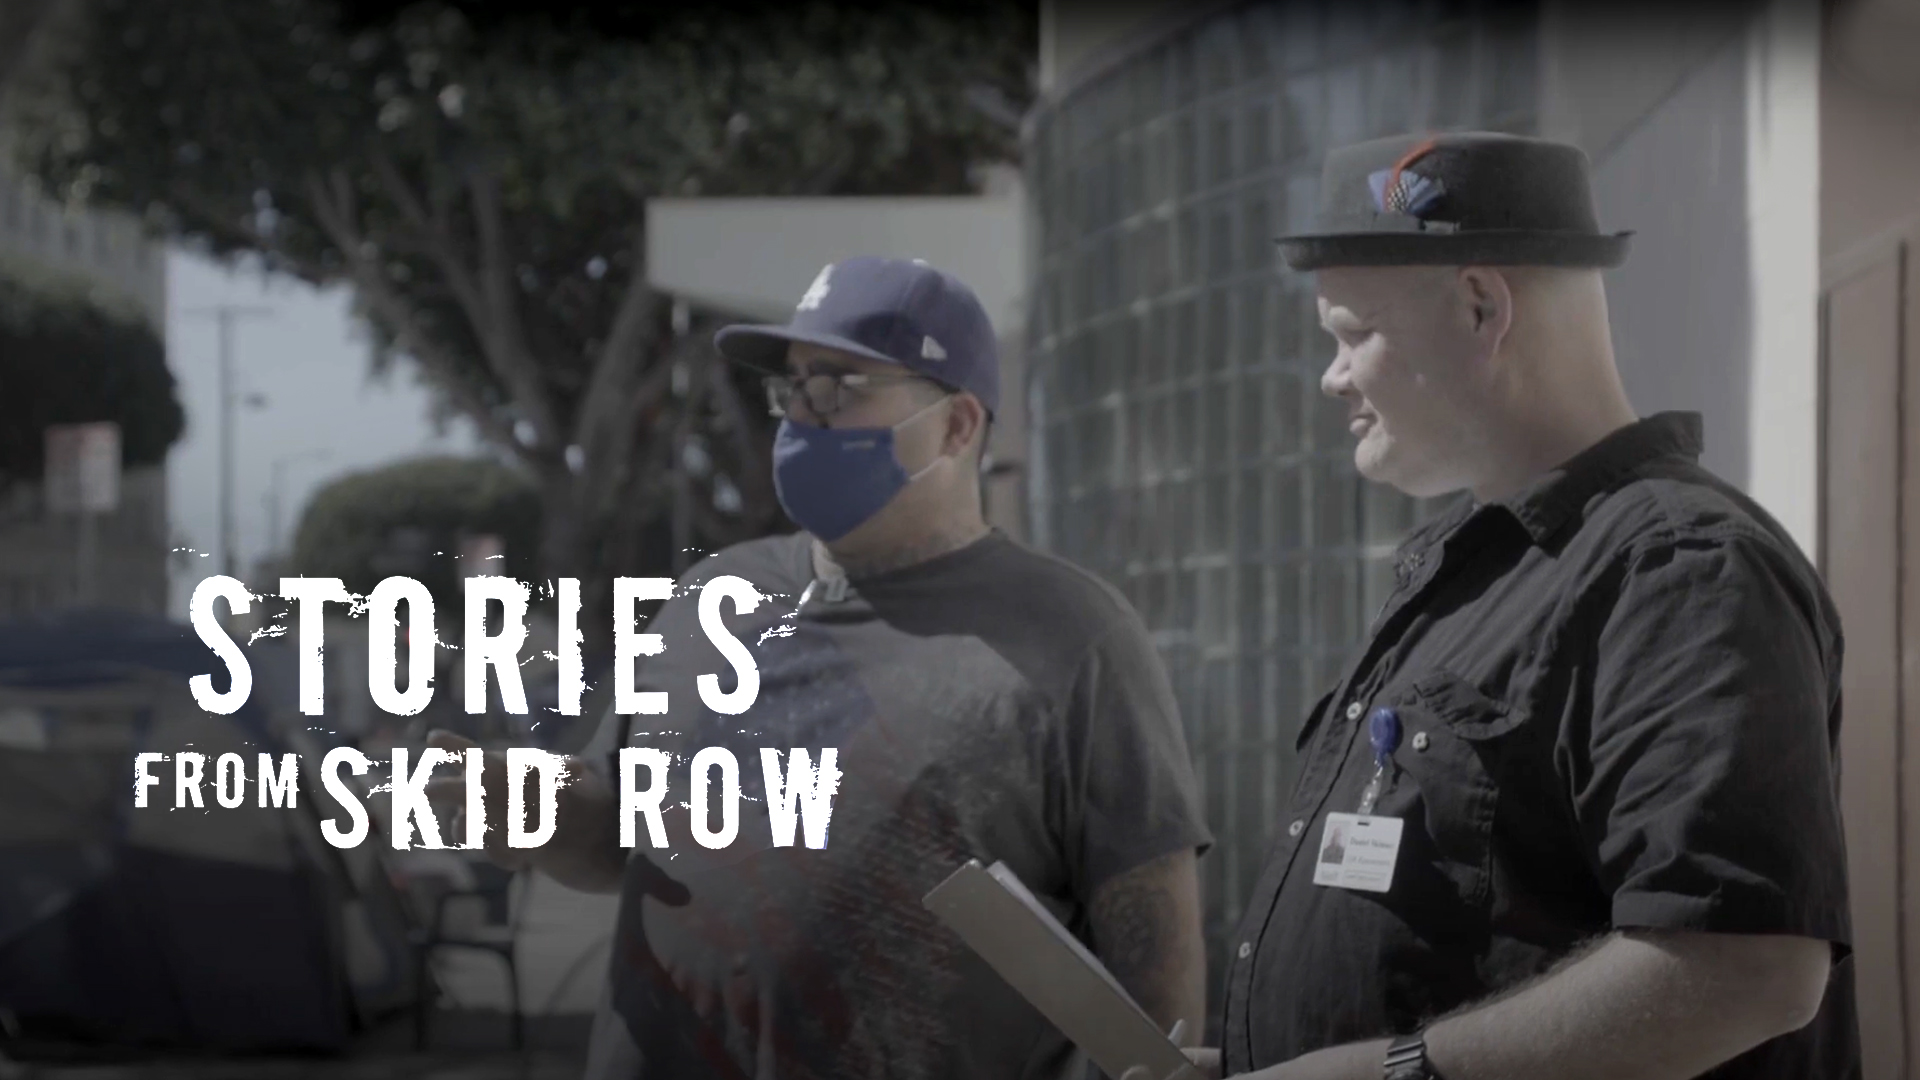 From lossing a job, to addiction and eventual homelessness to starting over with a new purpose and Hope.   | Stories from Skid Row - Daniels's Story --